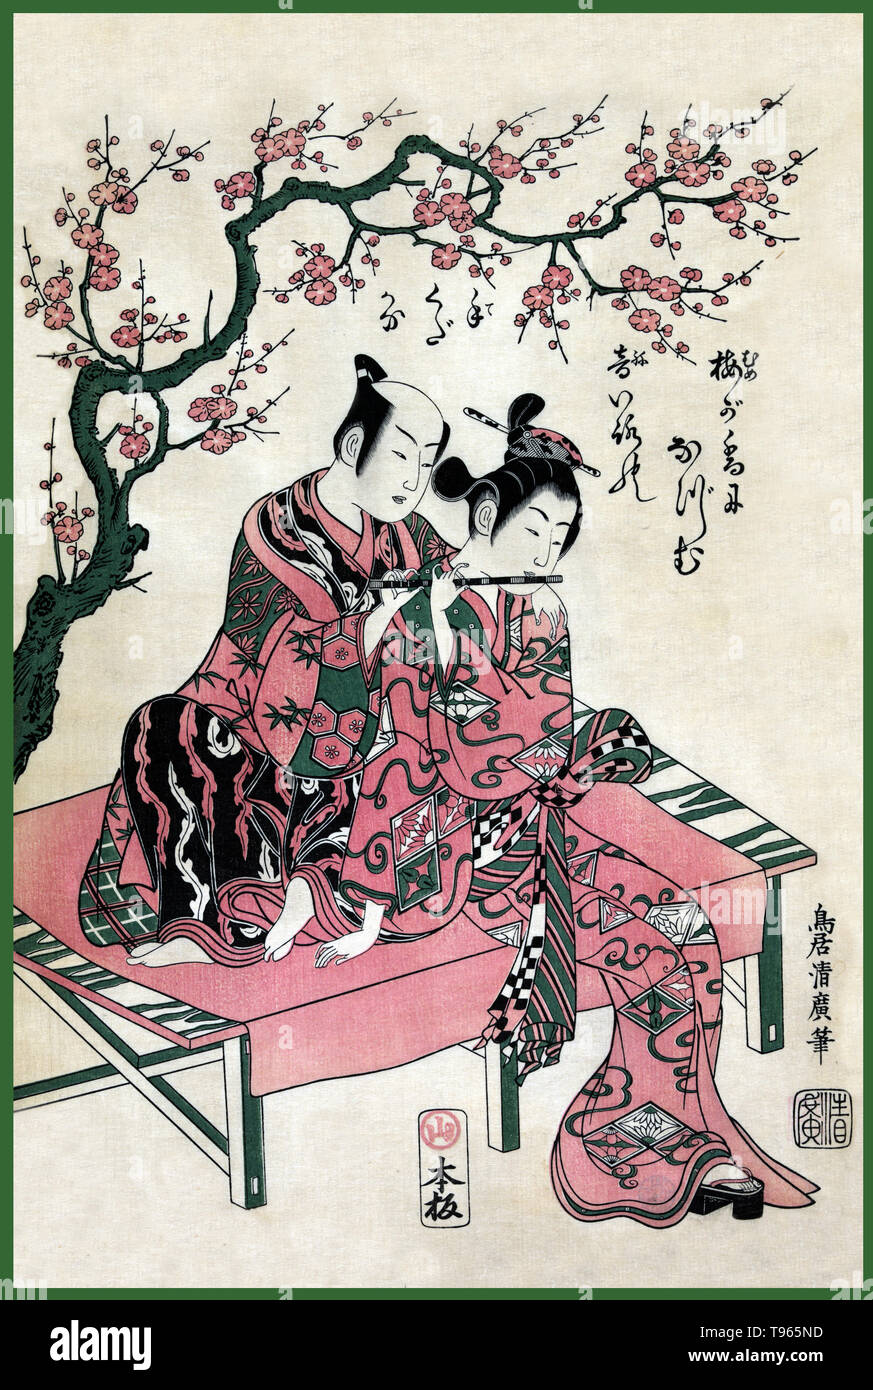 The harmonic couple. A man and a woman sitting on a bench, playing a flute, beneath a blossoming tree. Ukiyo-e (picture of the floating world) is a genre of Japanese art which flourished from the 17th through 19th centuries. Ukiyo-e was central to forming the West's perception of Japanese art in the late 19th century. From the 1870s Japonism became a prominent trend and had a strong influence on the early Impressionists, as well as Post-Impressionists and Art Nouveau artists. Stock Photo